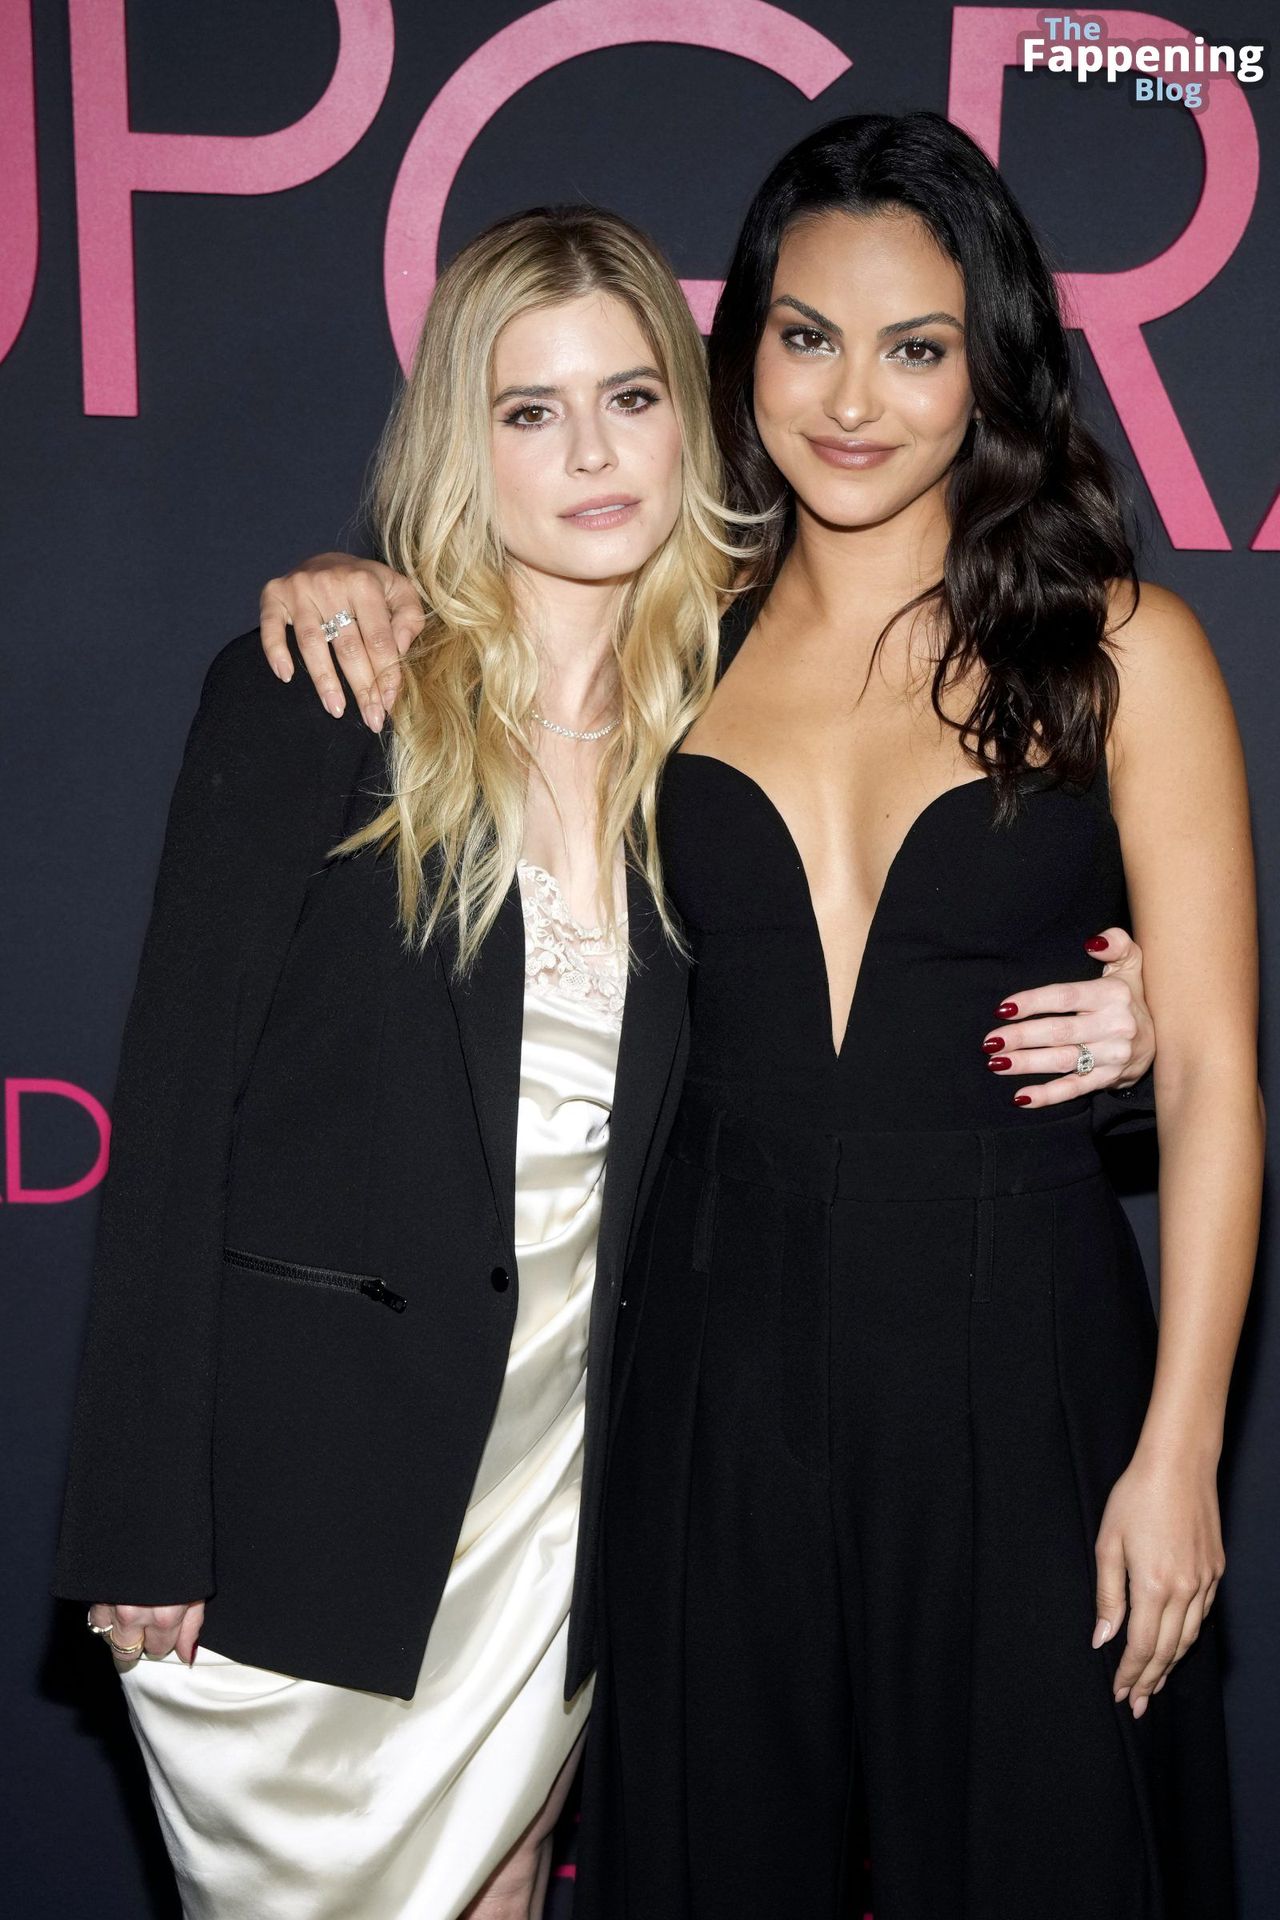 camila-mendes-upgraded-screening-cleavage-low-cut-dress-19-thefappeningblog.com_.jpg